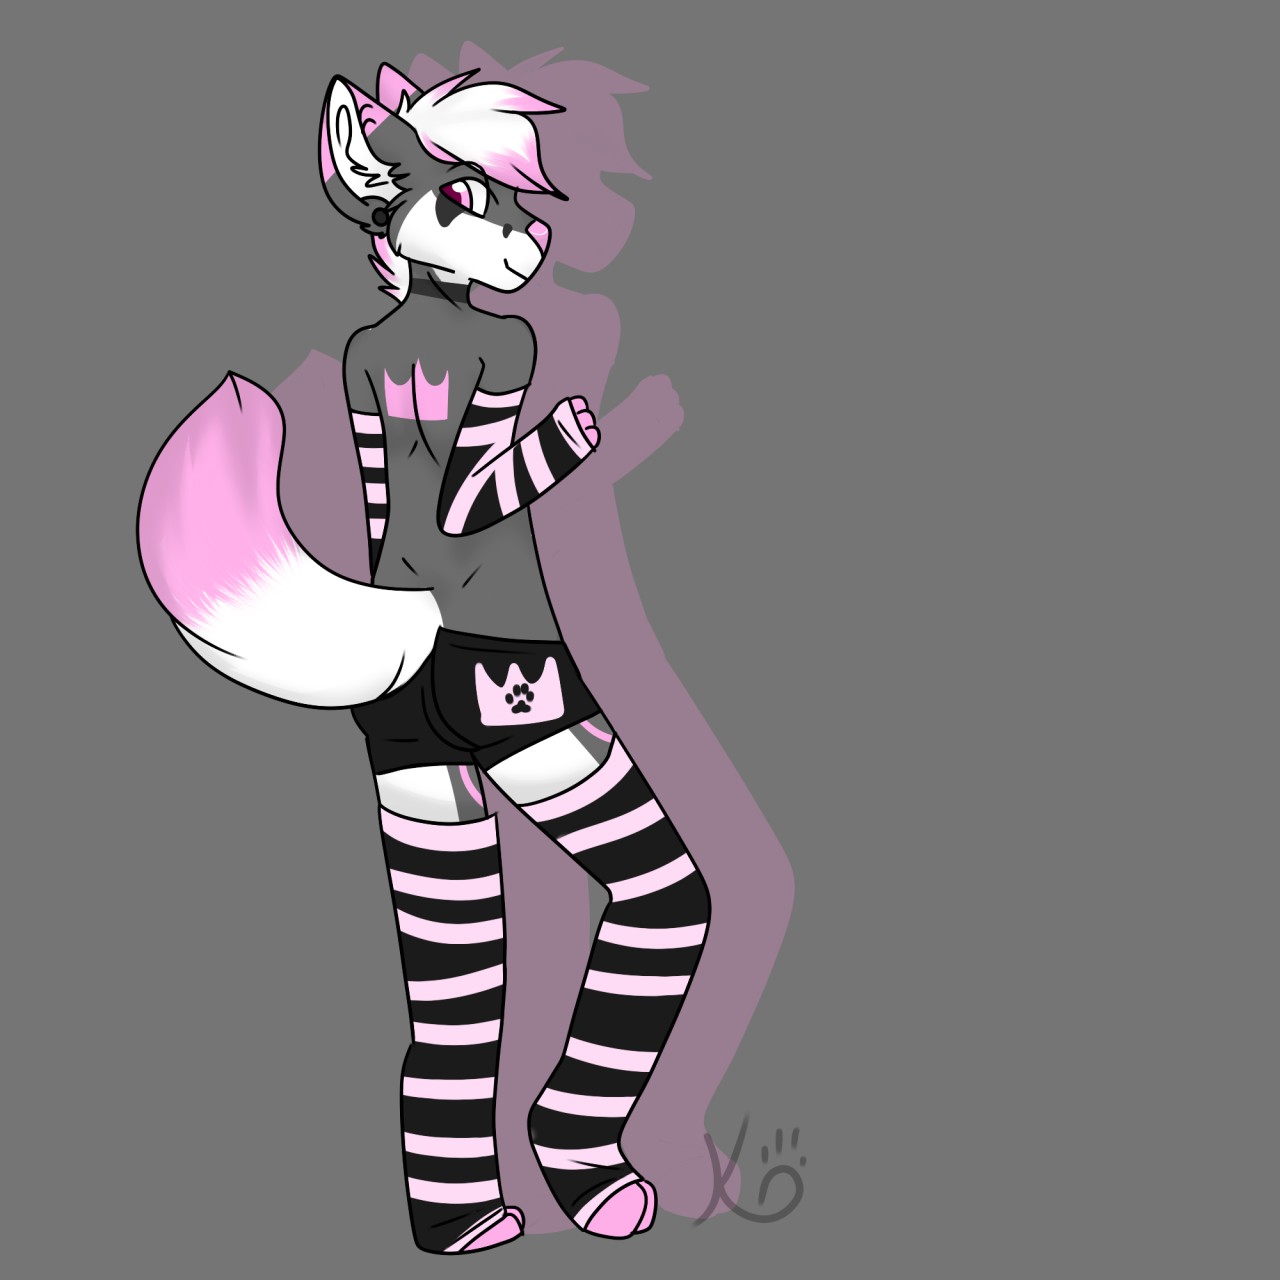 Femboy clothing by PinkFoxKnight -- Fur Affinity [dot] net